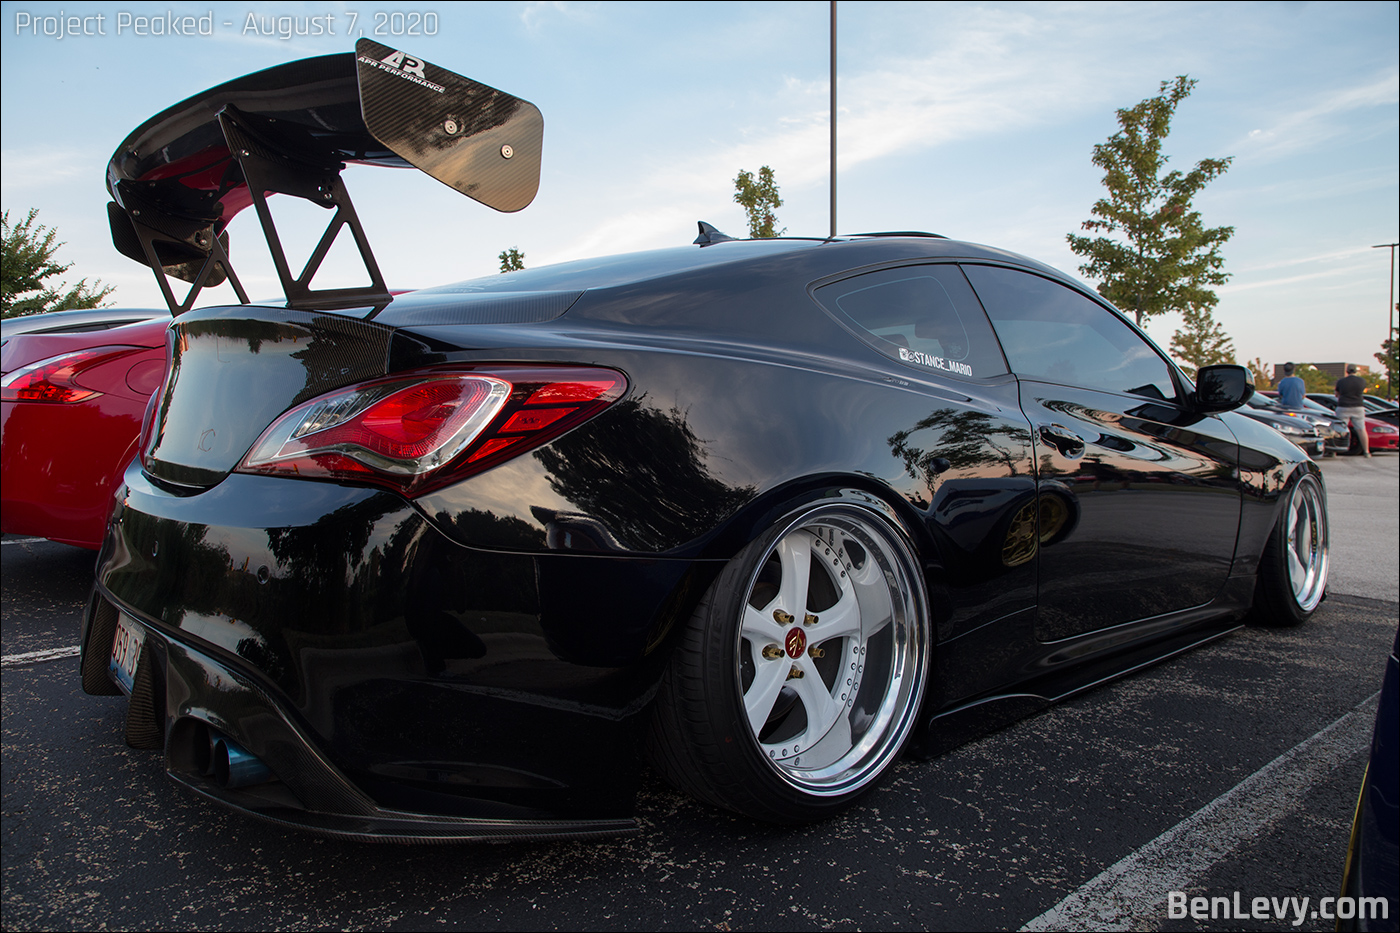 CF APR wing on a CF trunk of a Hyundai Genesis Coupe